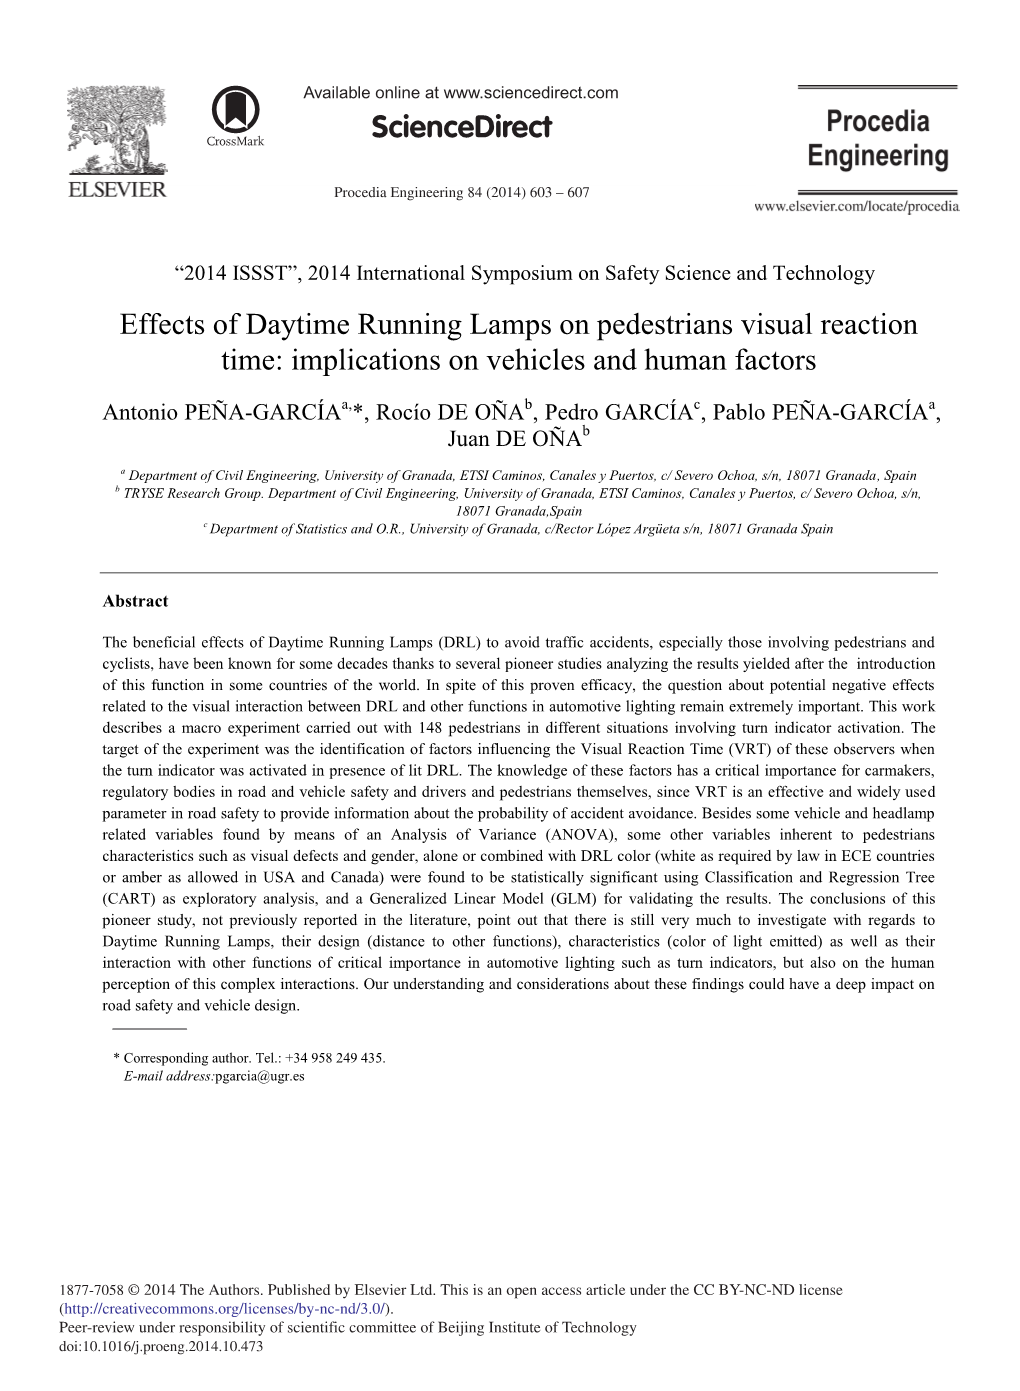 Effects of Daytime Running Lamps on Pedestrians Visual Reaction Time: Implications on Vehicles and Human Factors